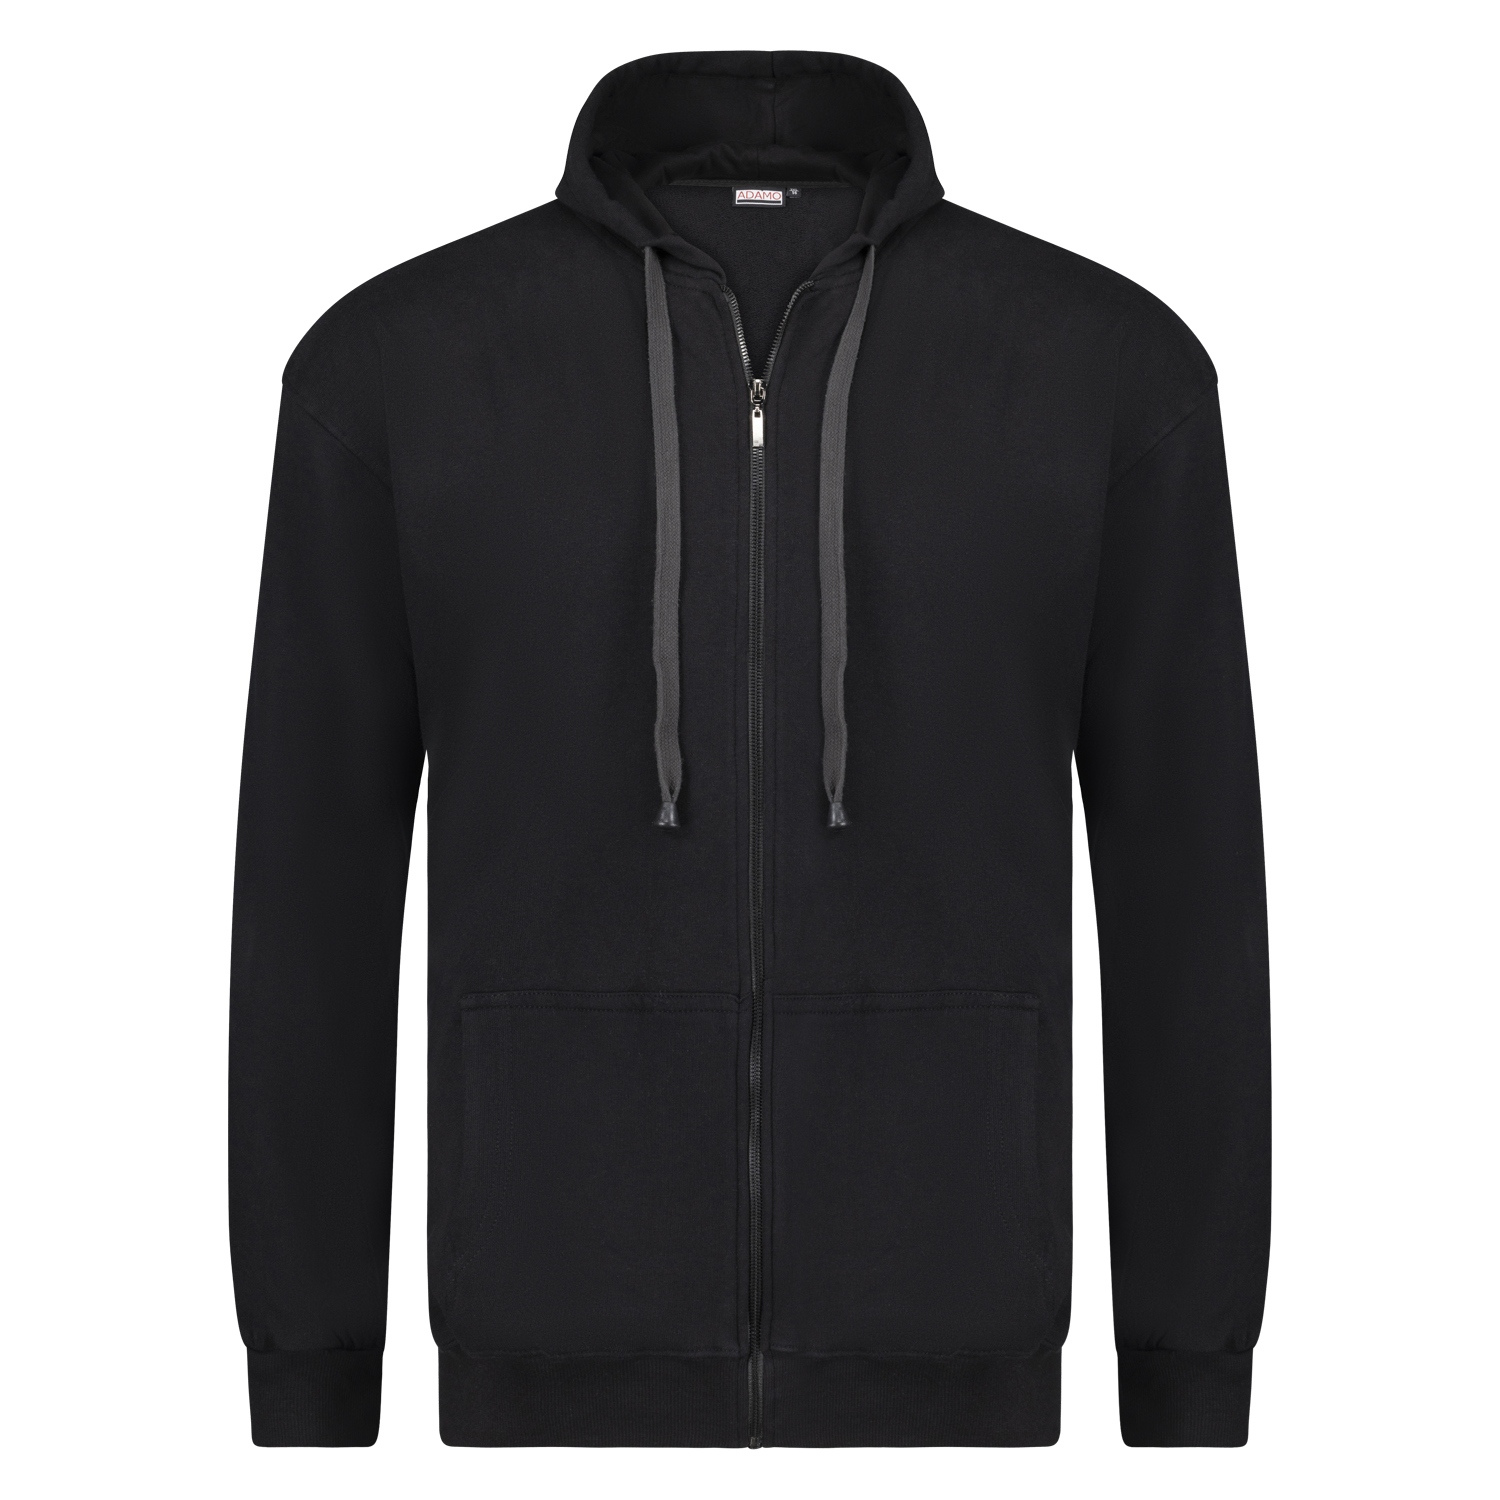 Hooded Sweatjacket ATHEN from Adamo black in oversizes up to 14XL